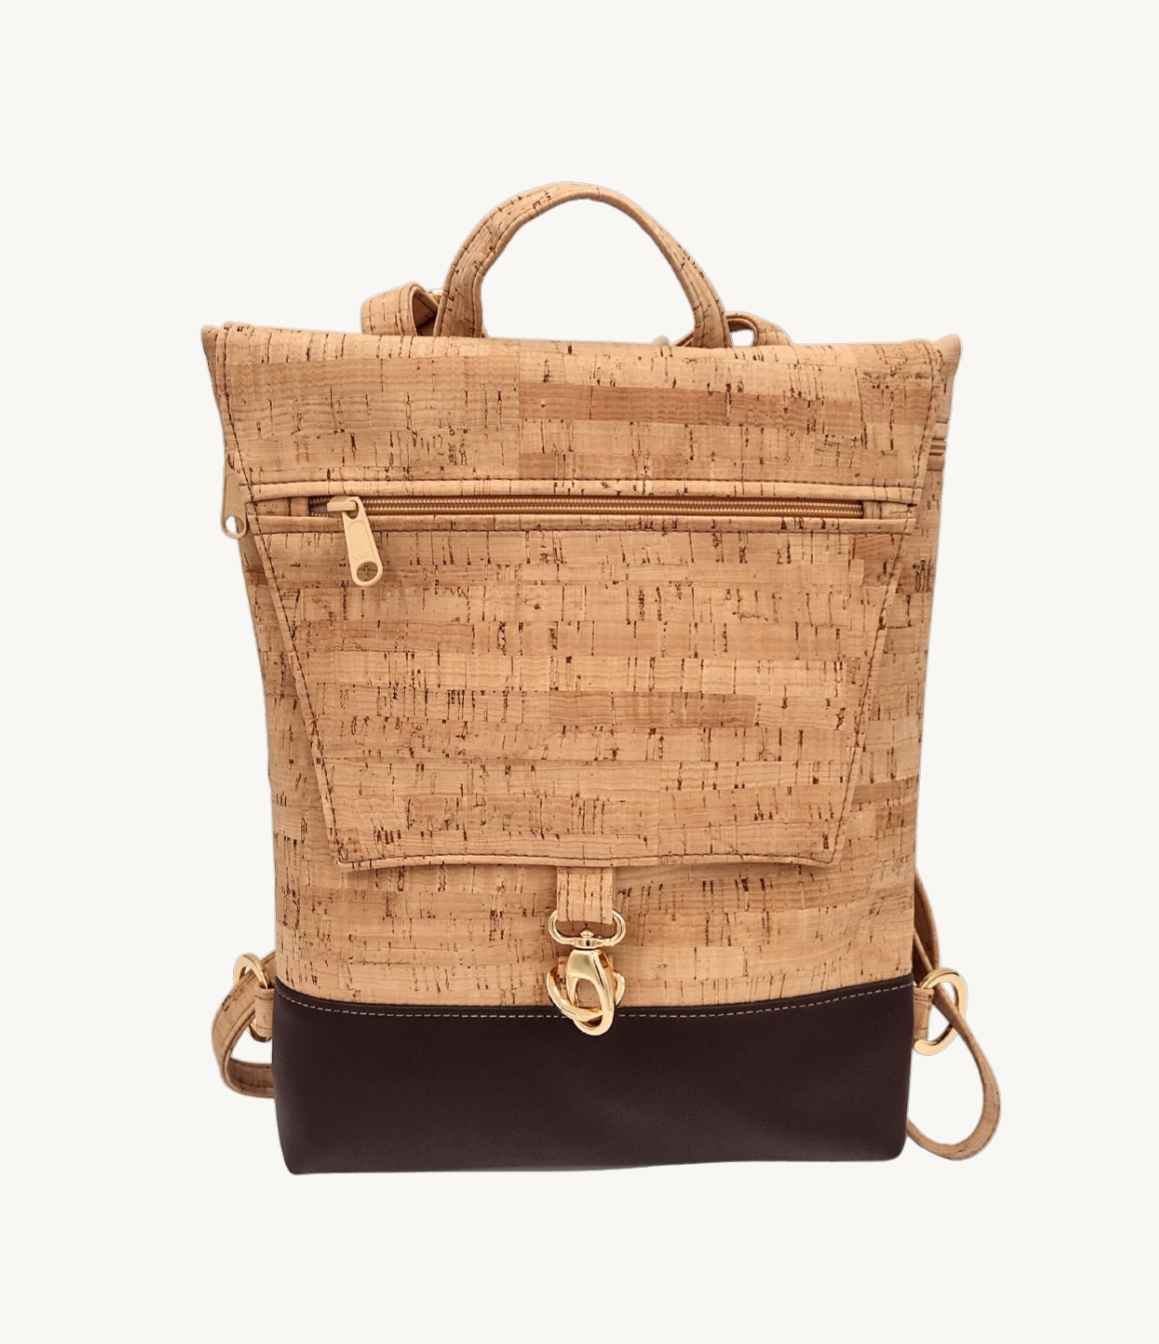 Cork leather cruelty free backpack very durable